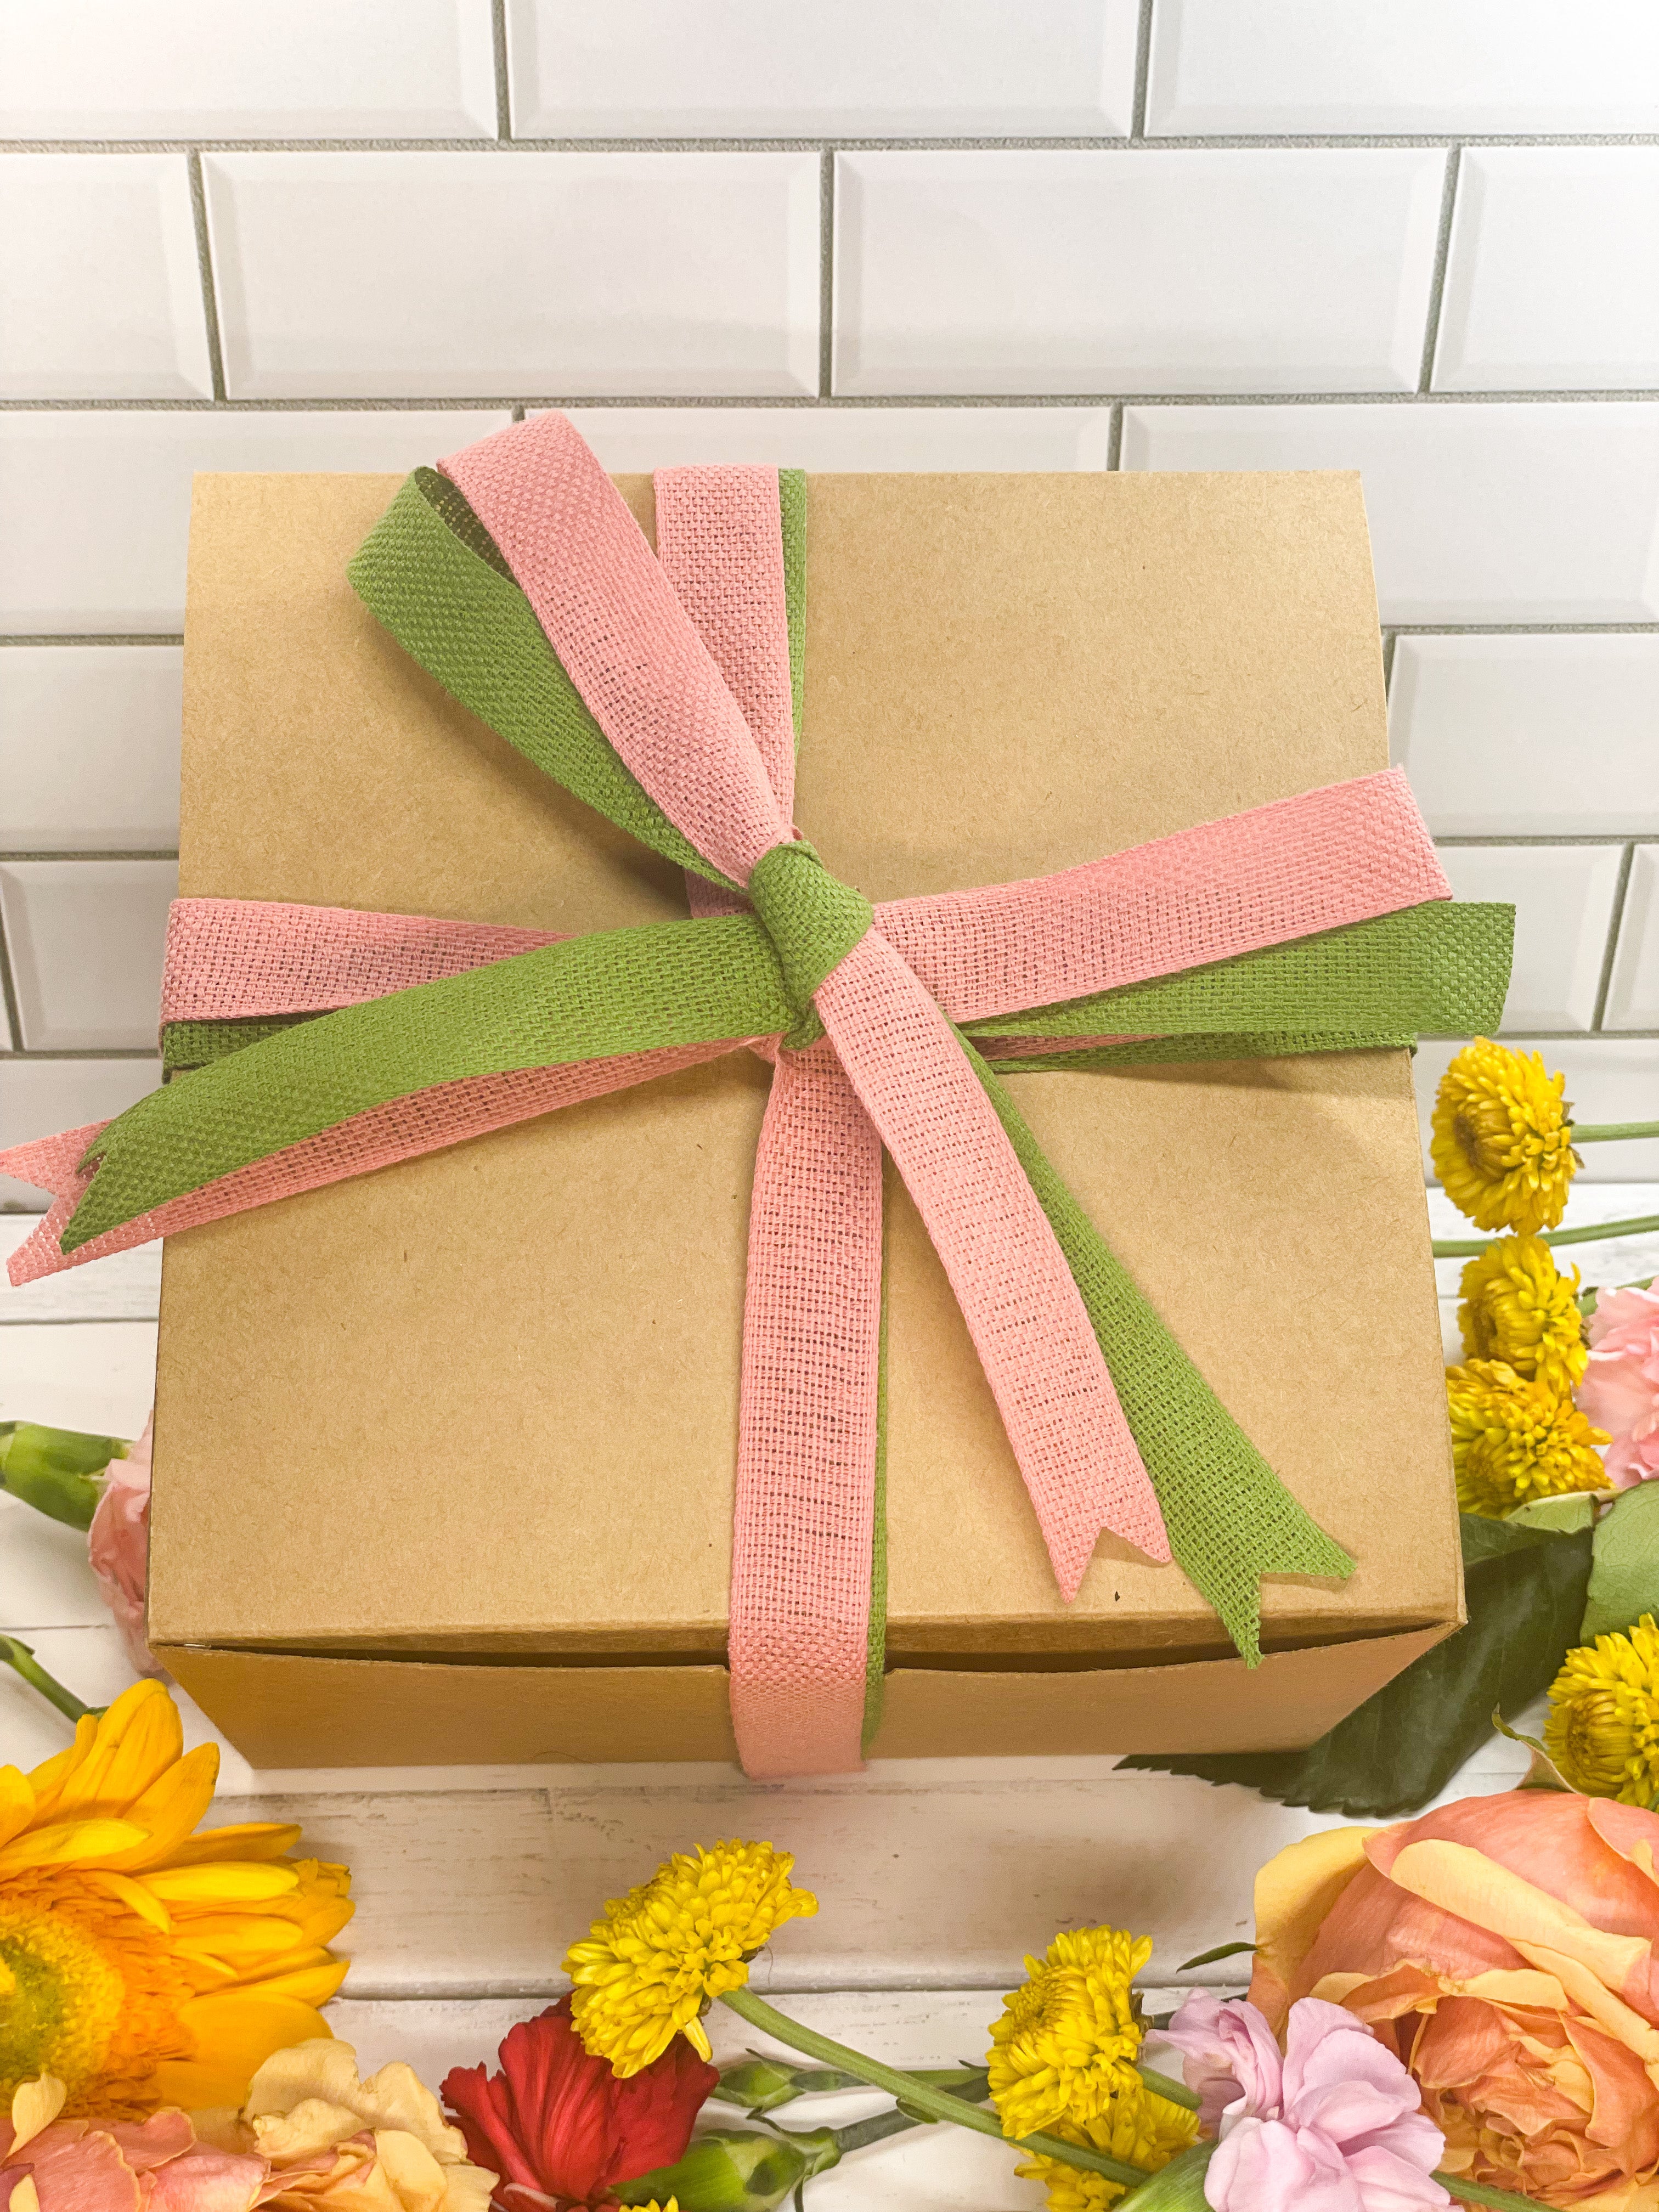 This gorgeous Mother's Day gift box is making sure kids don't go hungry